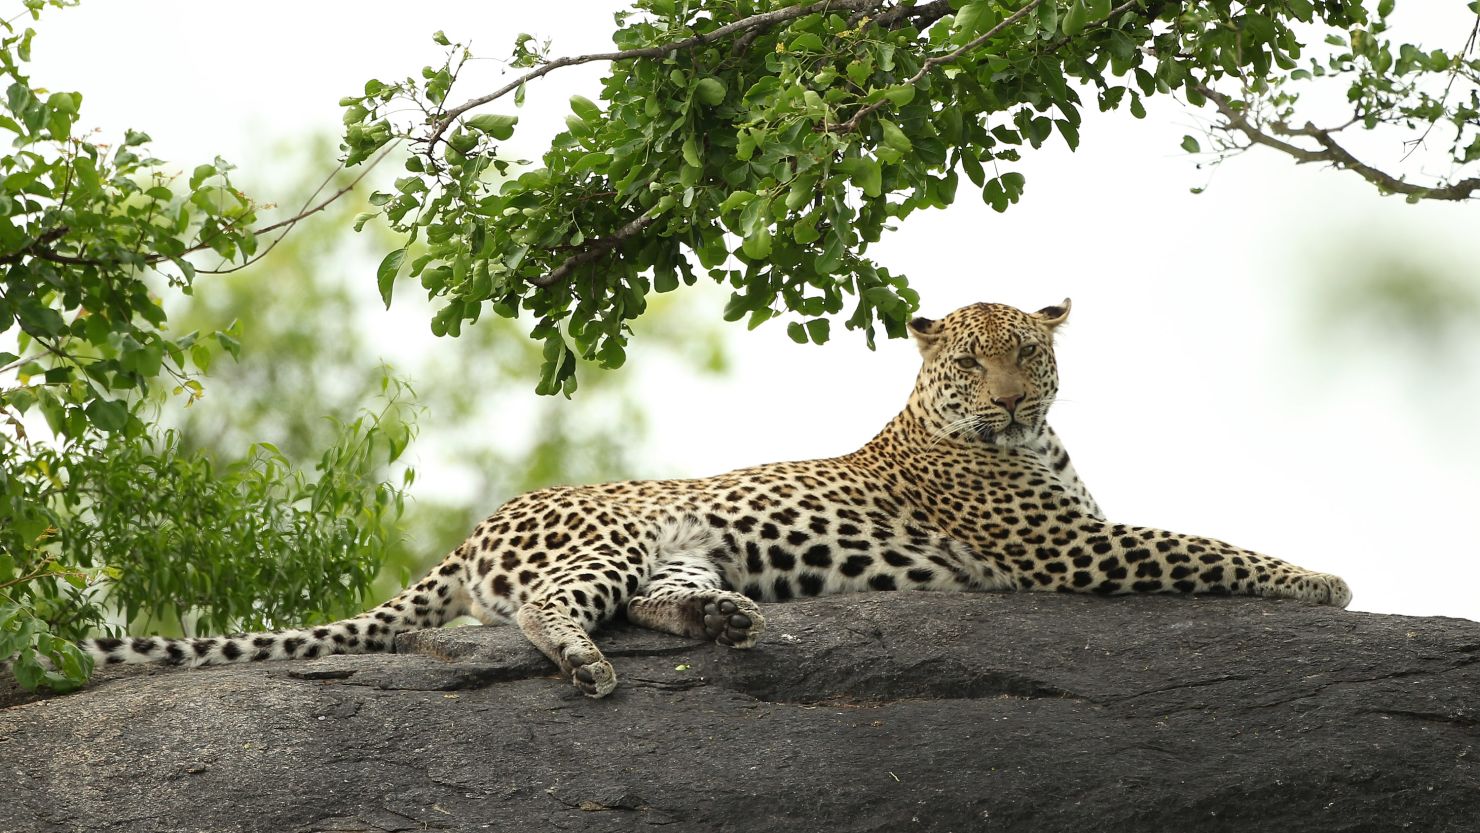 A leopard is pictured on a rock in the Kruger National Park in South Africa. (File photo)